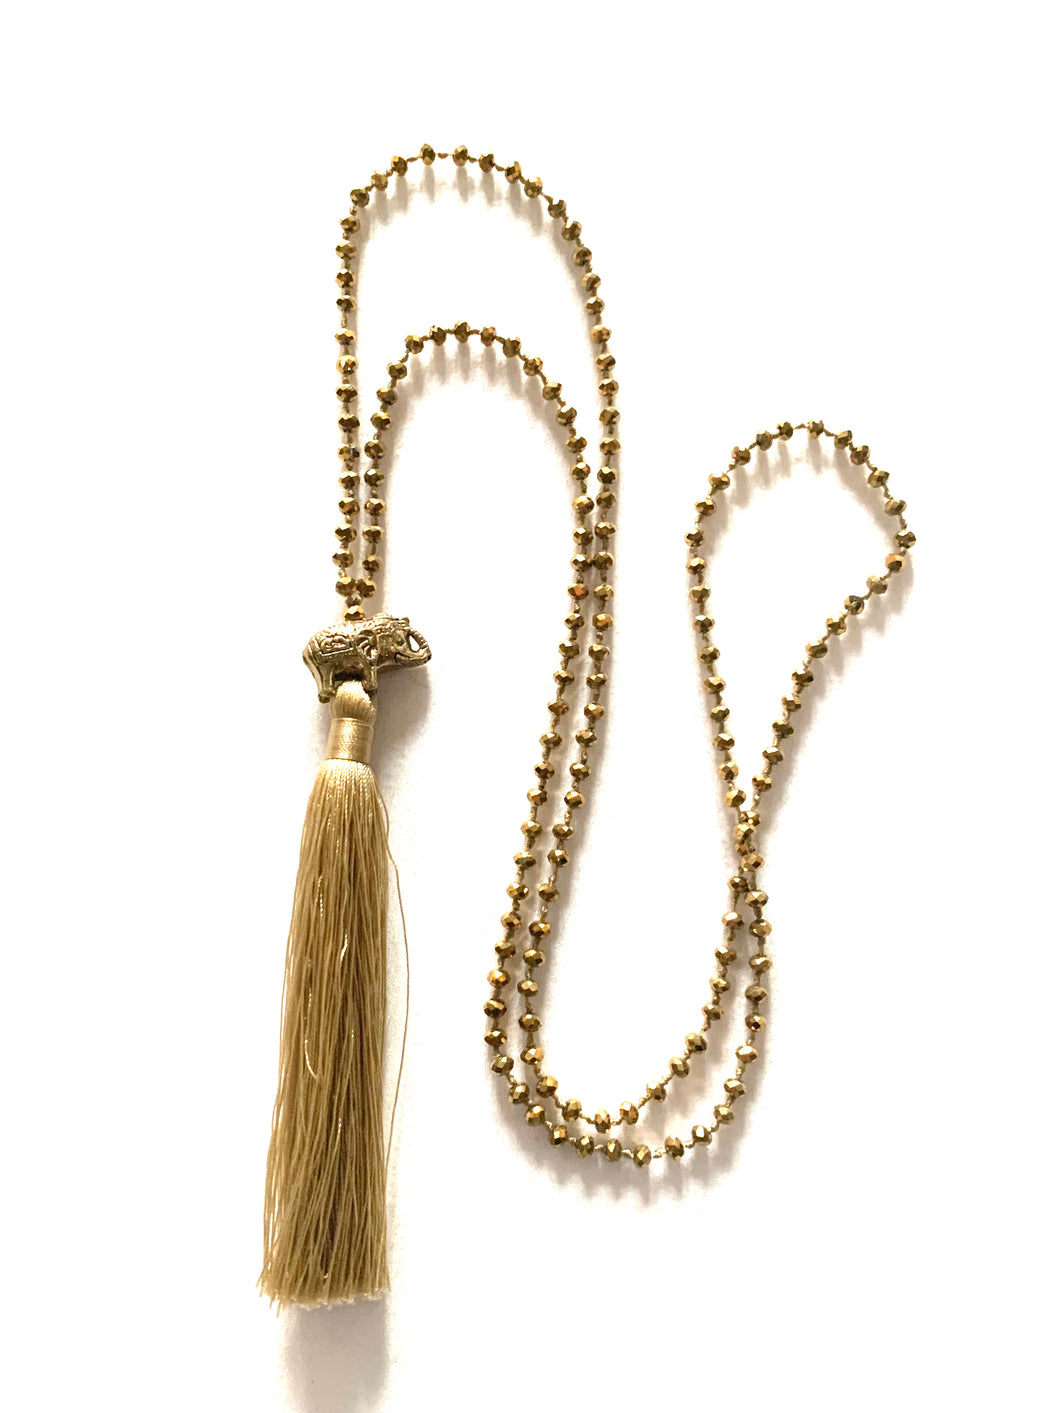 Elephant gold beaded necklace with tassel